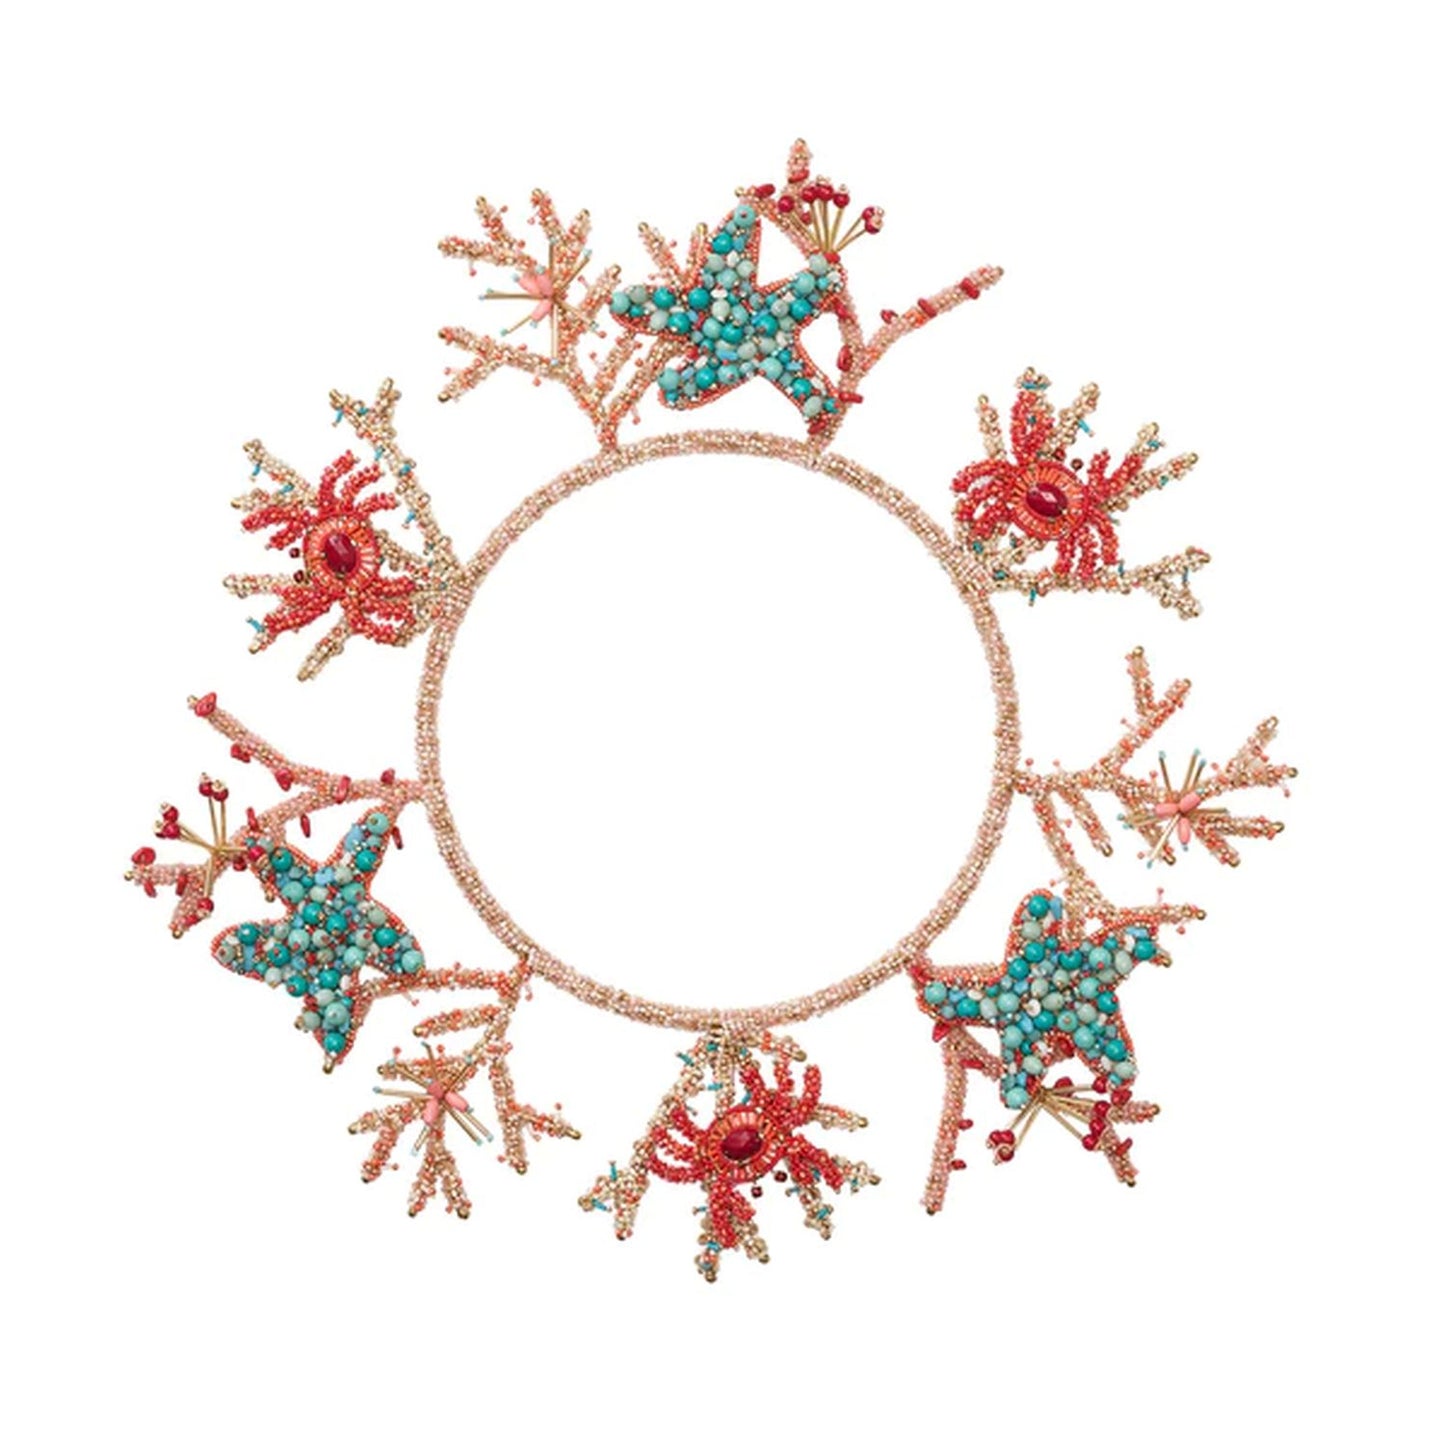 Kim Seybert Coral Charm Charger in Turquoise, Coral & Gold, Set of 2